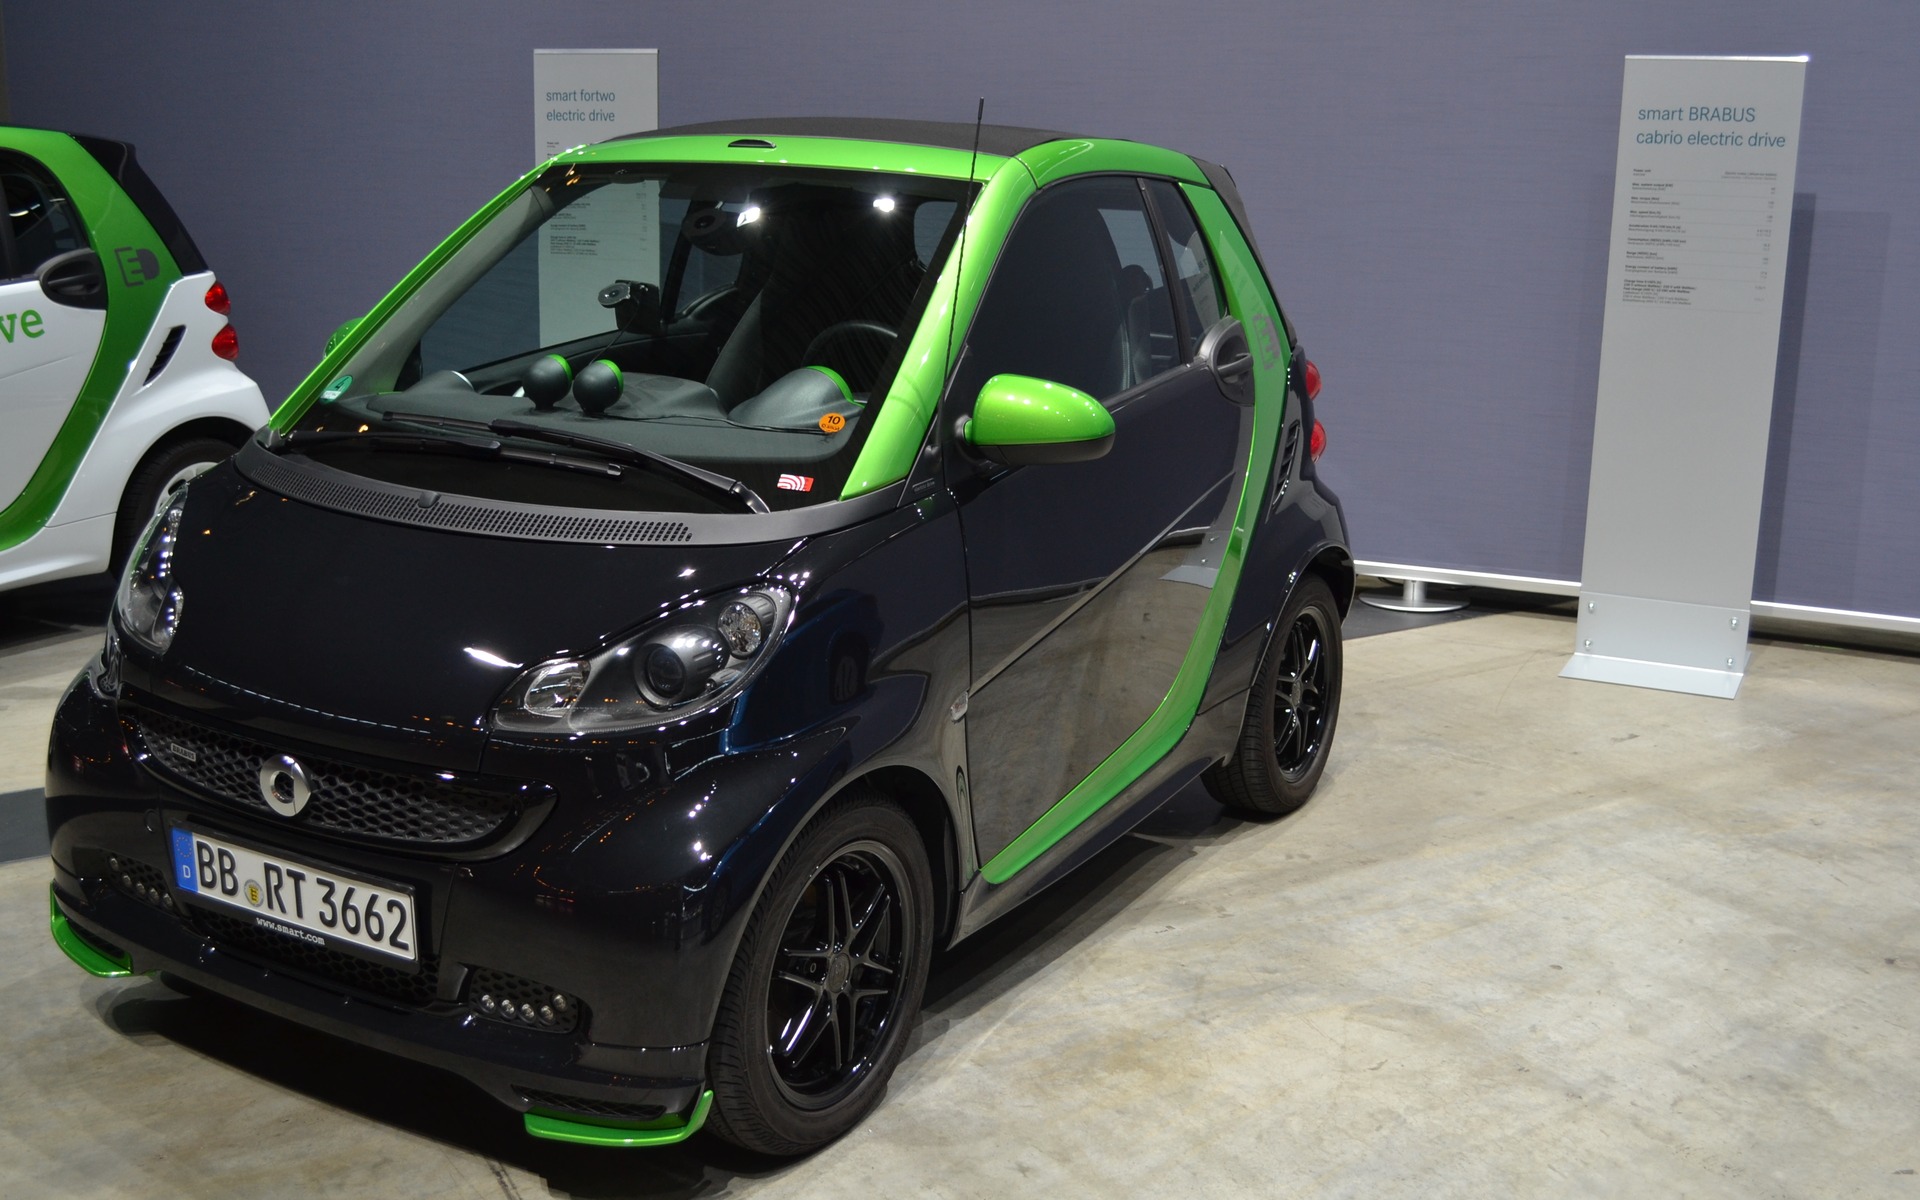 smart fortwo electric drive Brabus